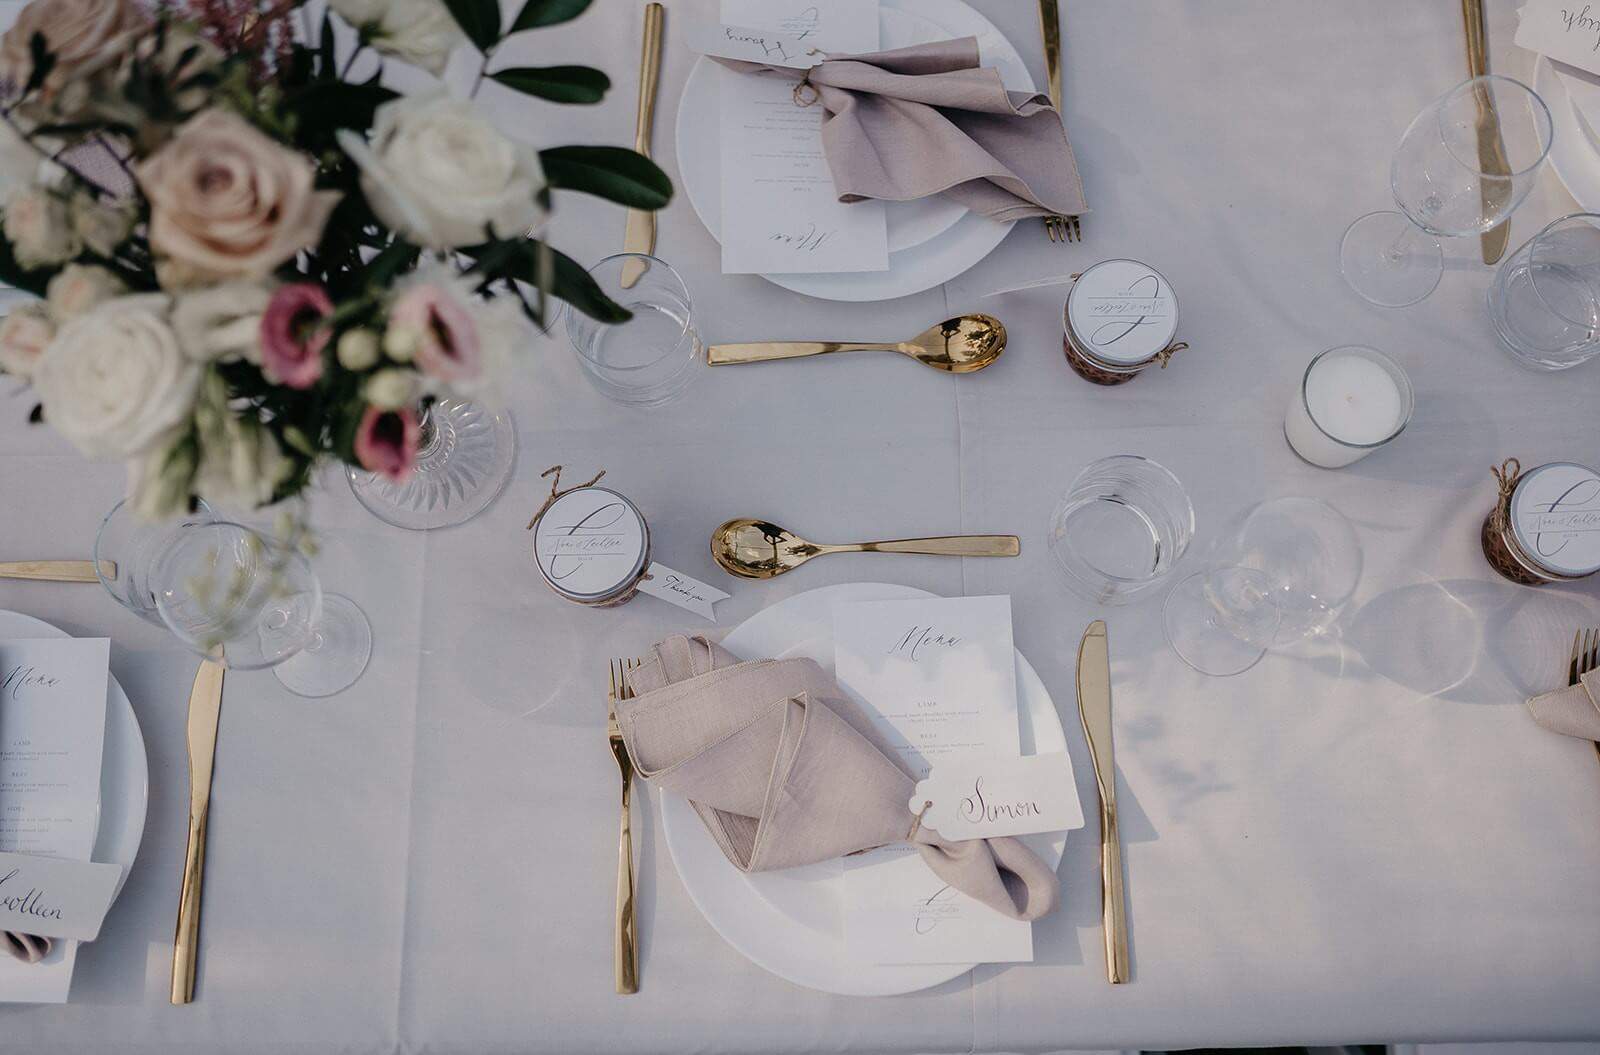 Tableware setup for wedding reception in blush and gold colours